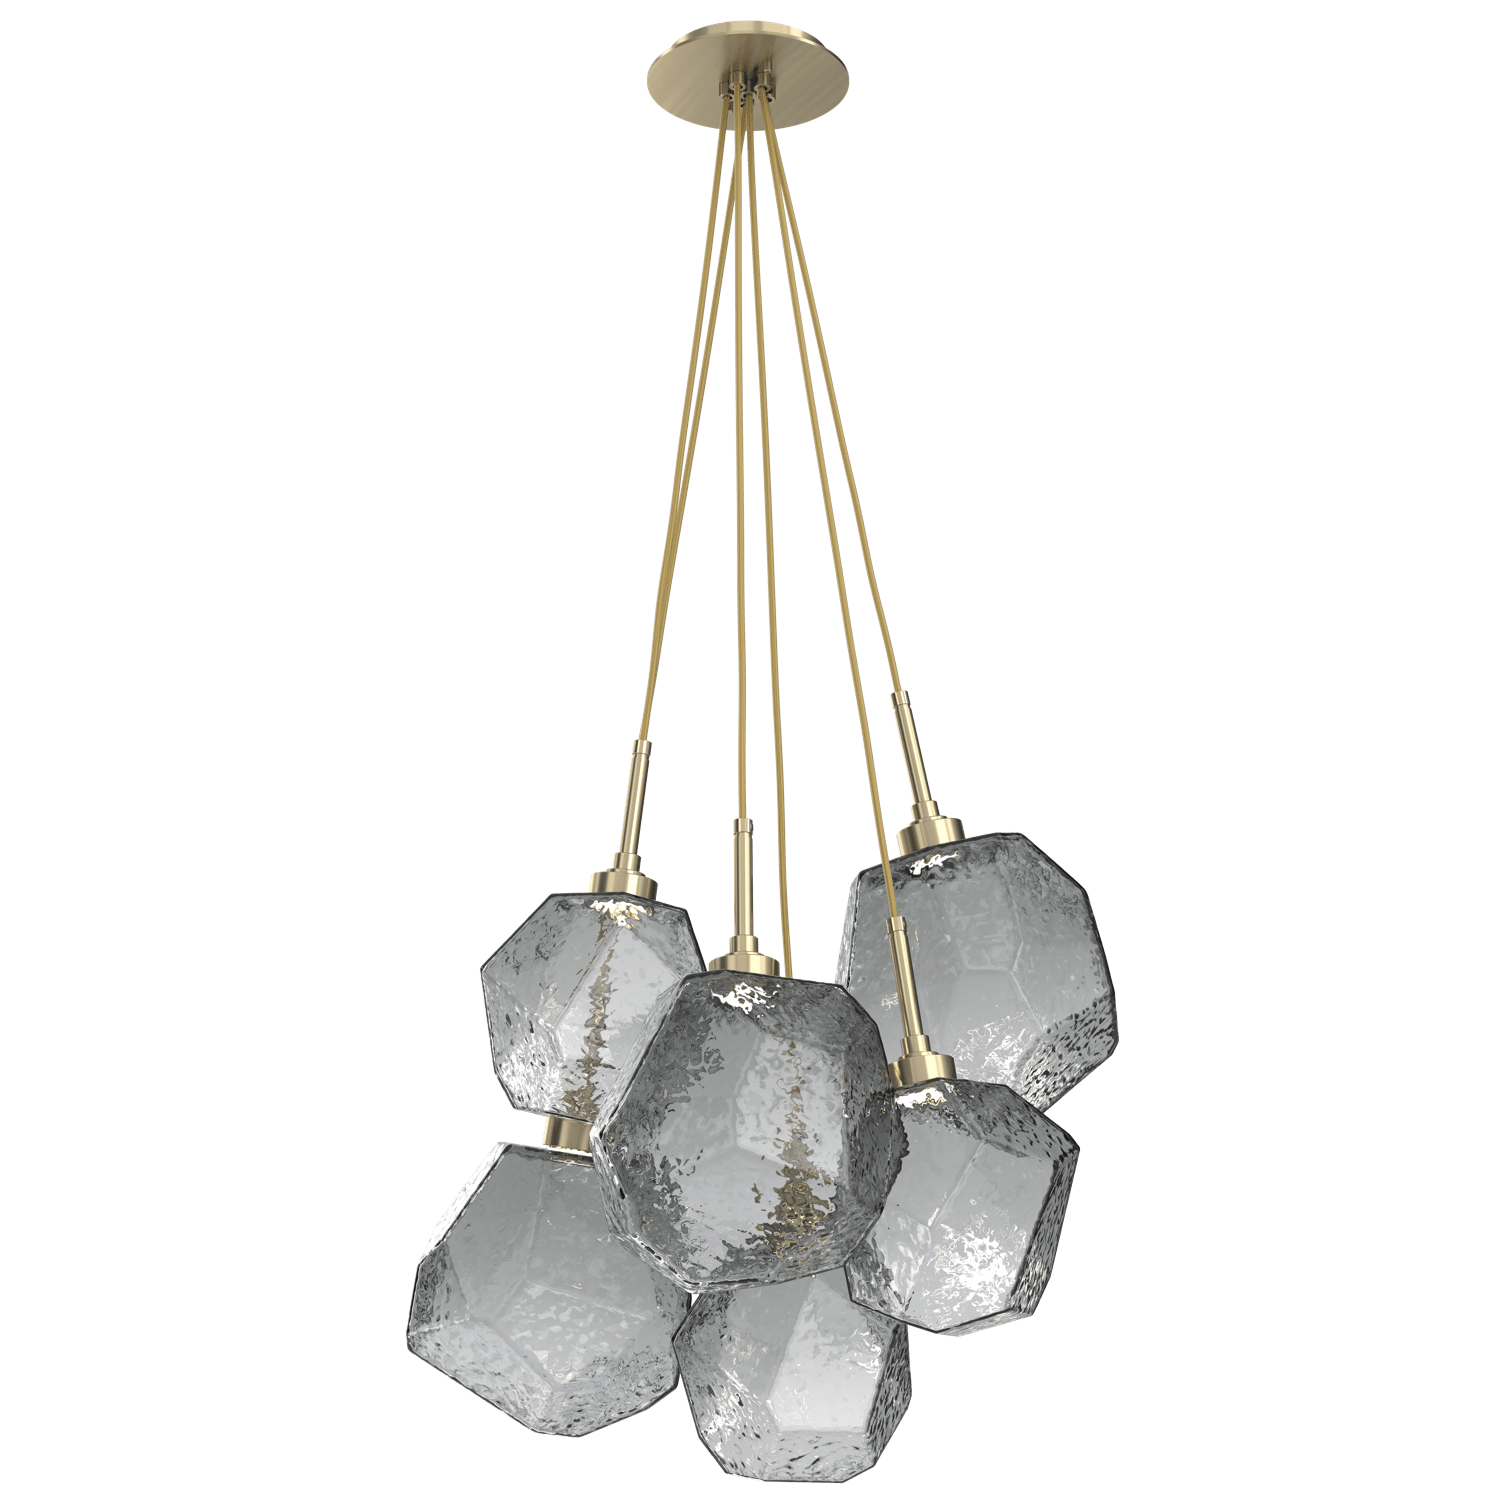 CHB0039-0F-HB-S-Hammerton-Studio-Gem-6-light-cluster-pendant-light-with-heritage-brass-finish-and-smoke-blown-glass-shades-and-LED-lamping